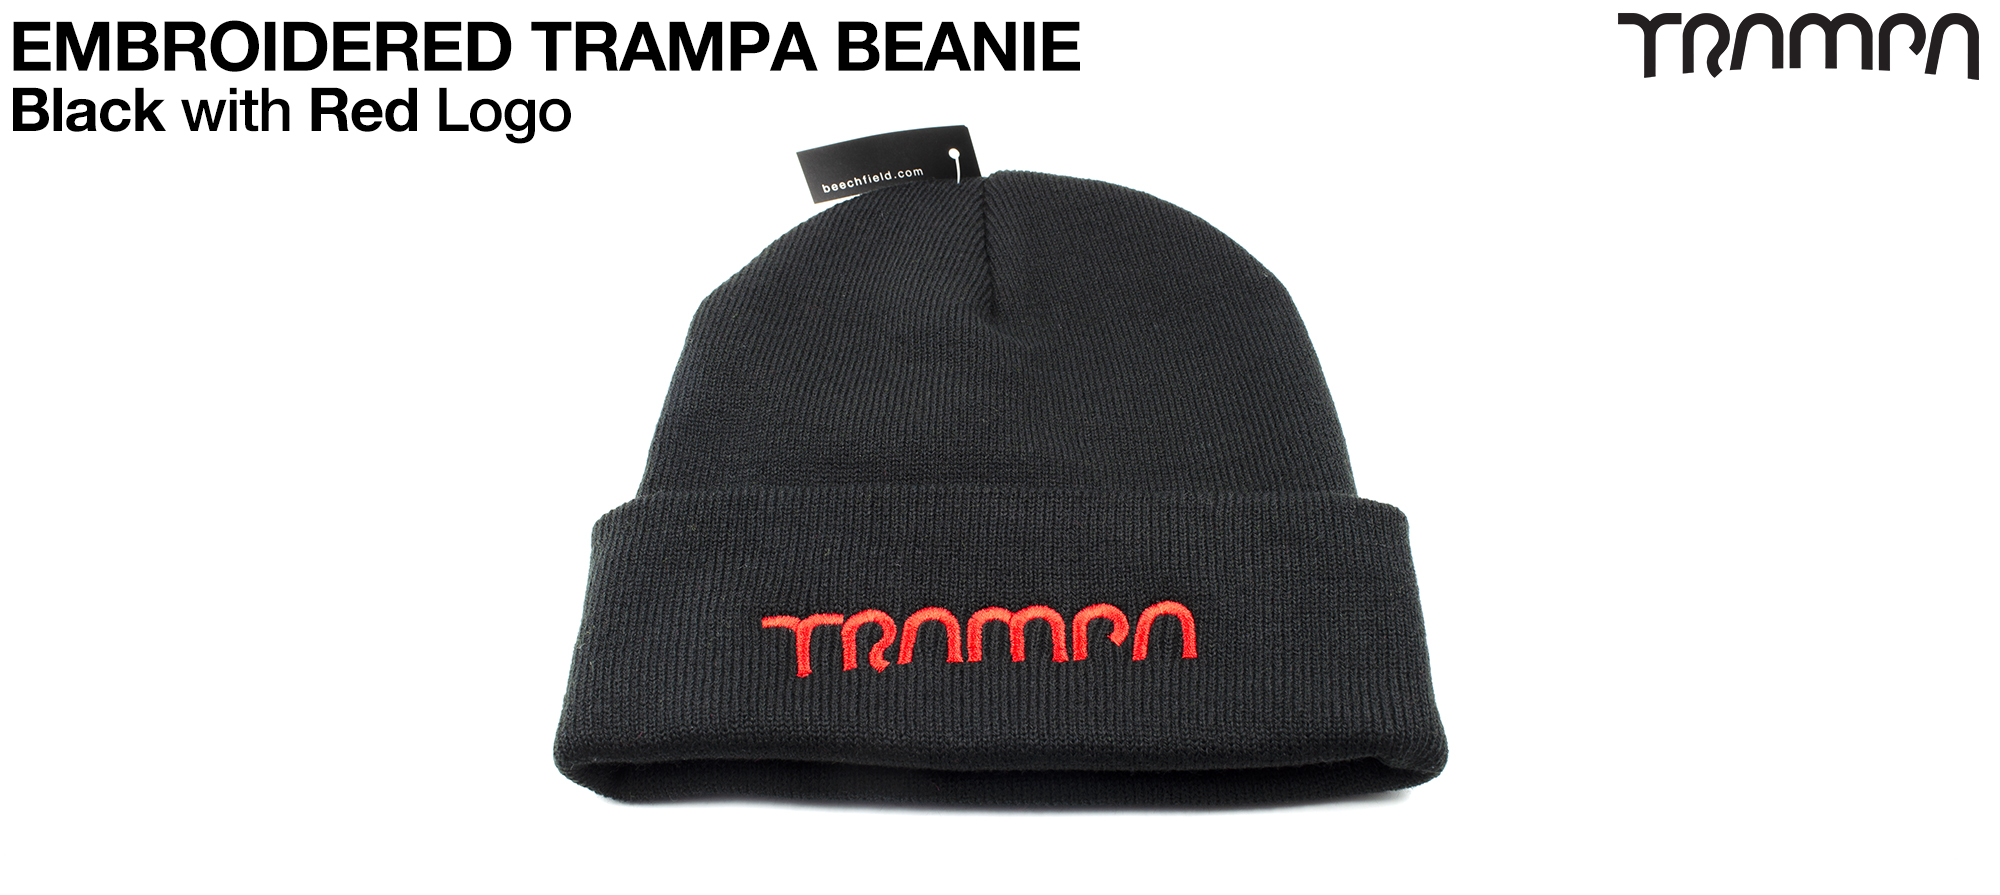 BLACK Beanie with RED TRAMPA logo  - Double thick turn over for extra warmth 